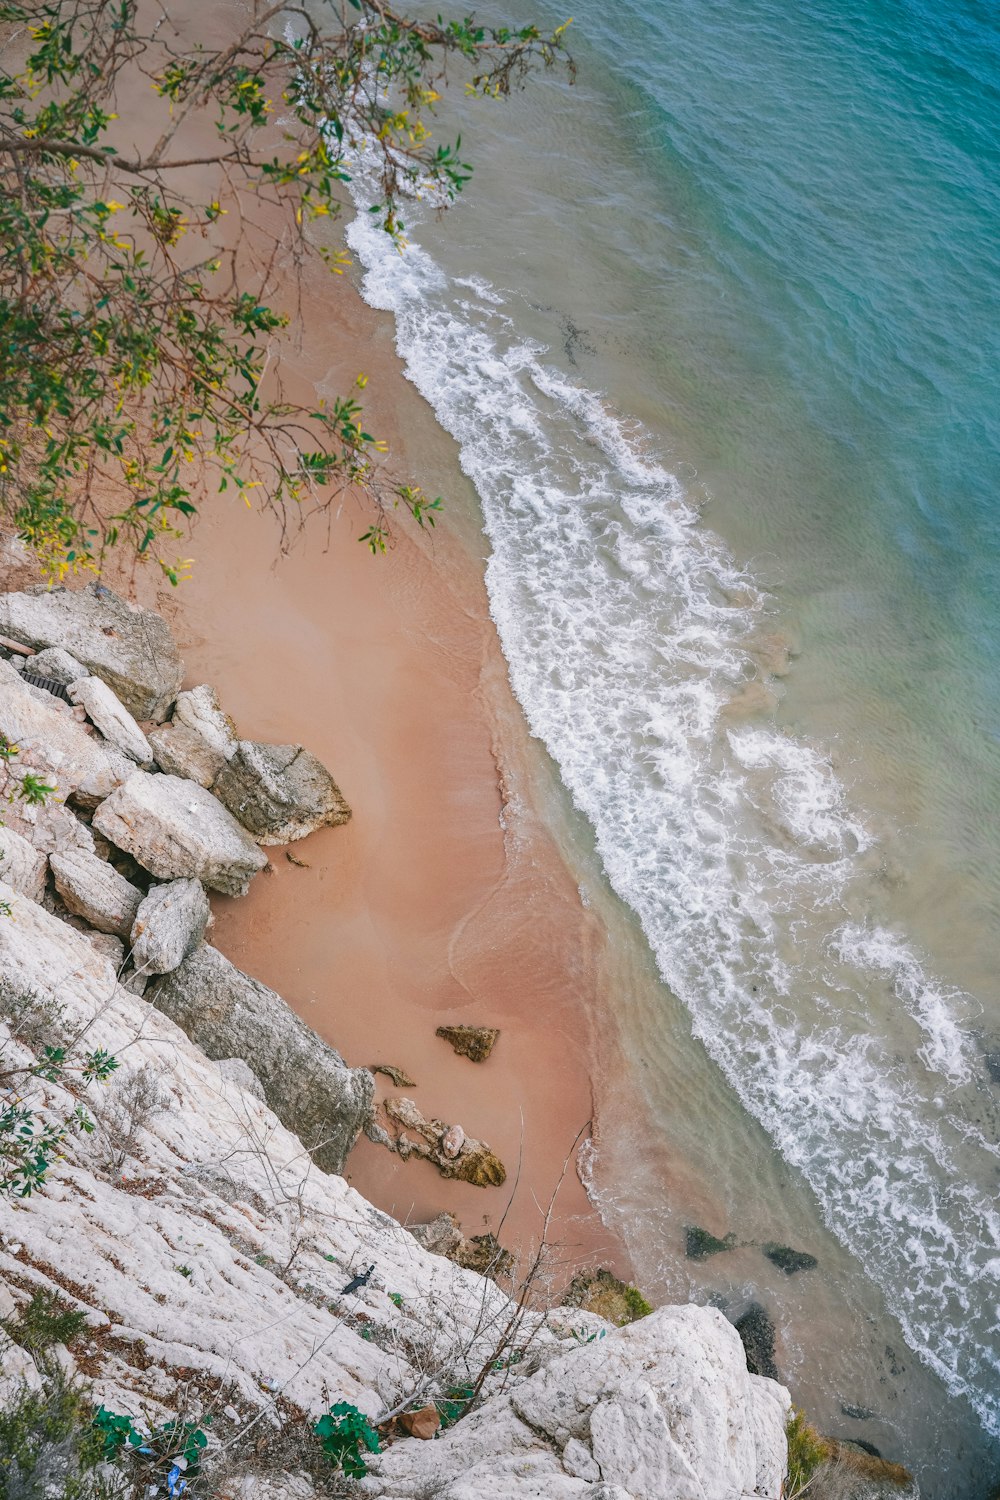 a view of the beach from above a cliff